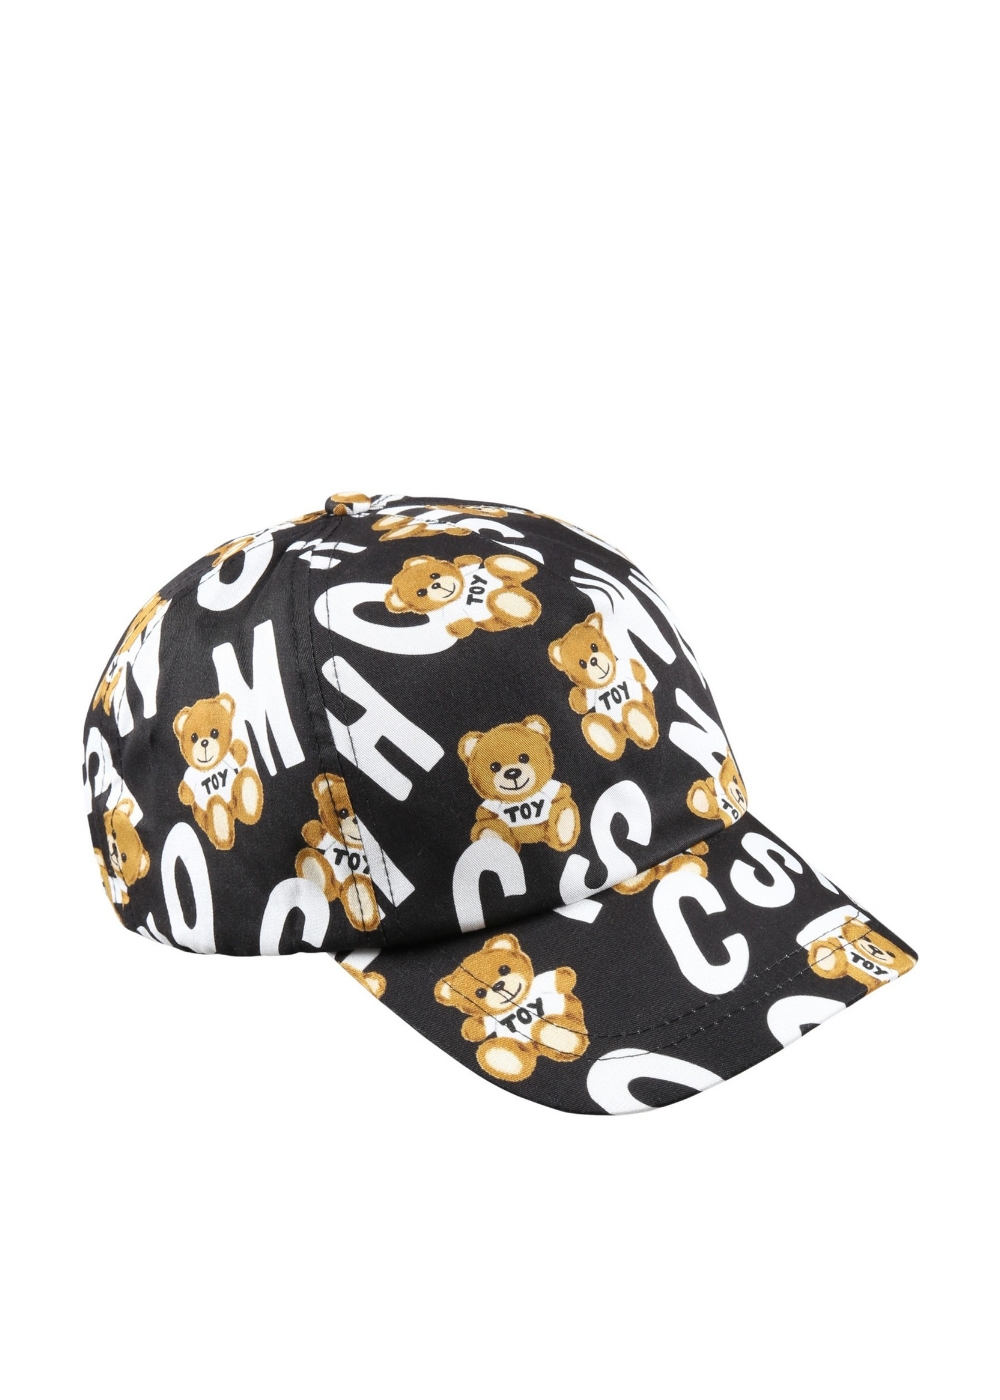 Featured image for “Moschino Cappello Teddy Bear all-over”